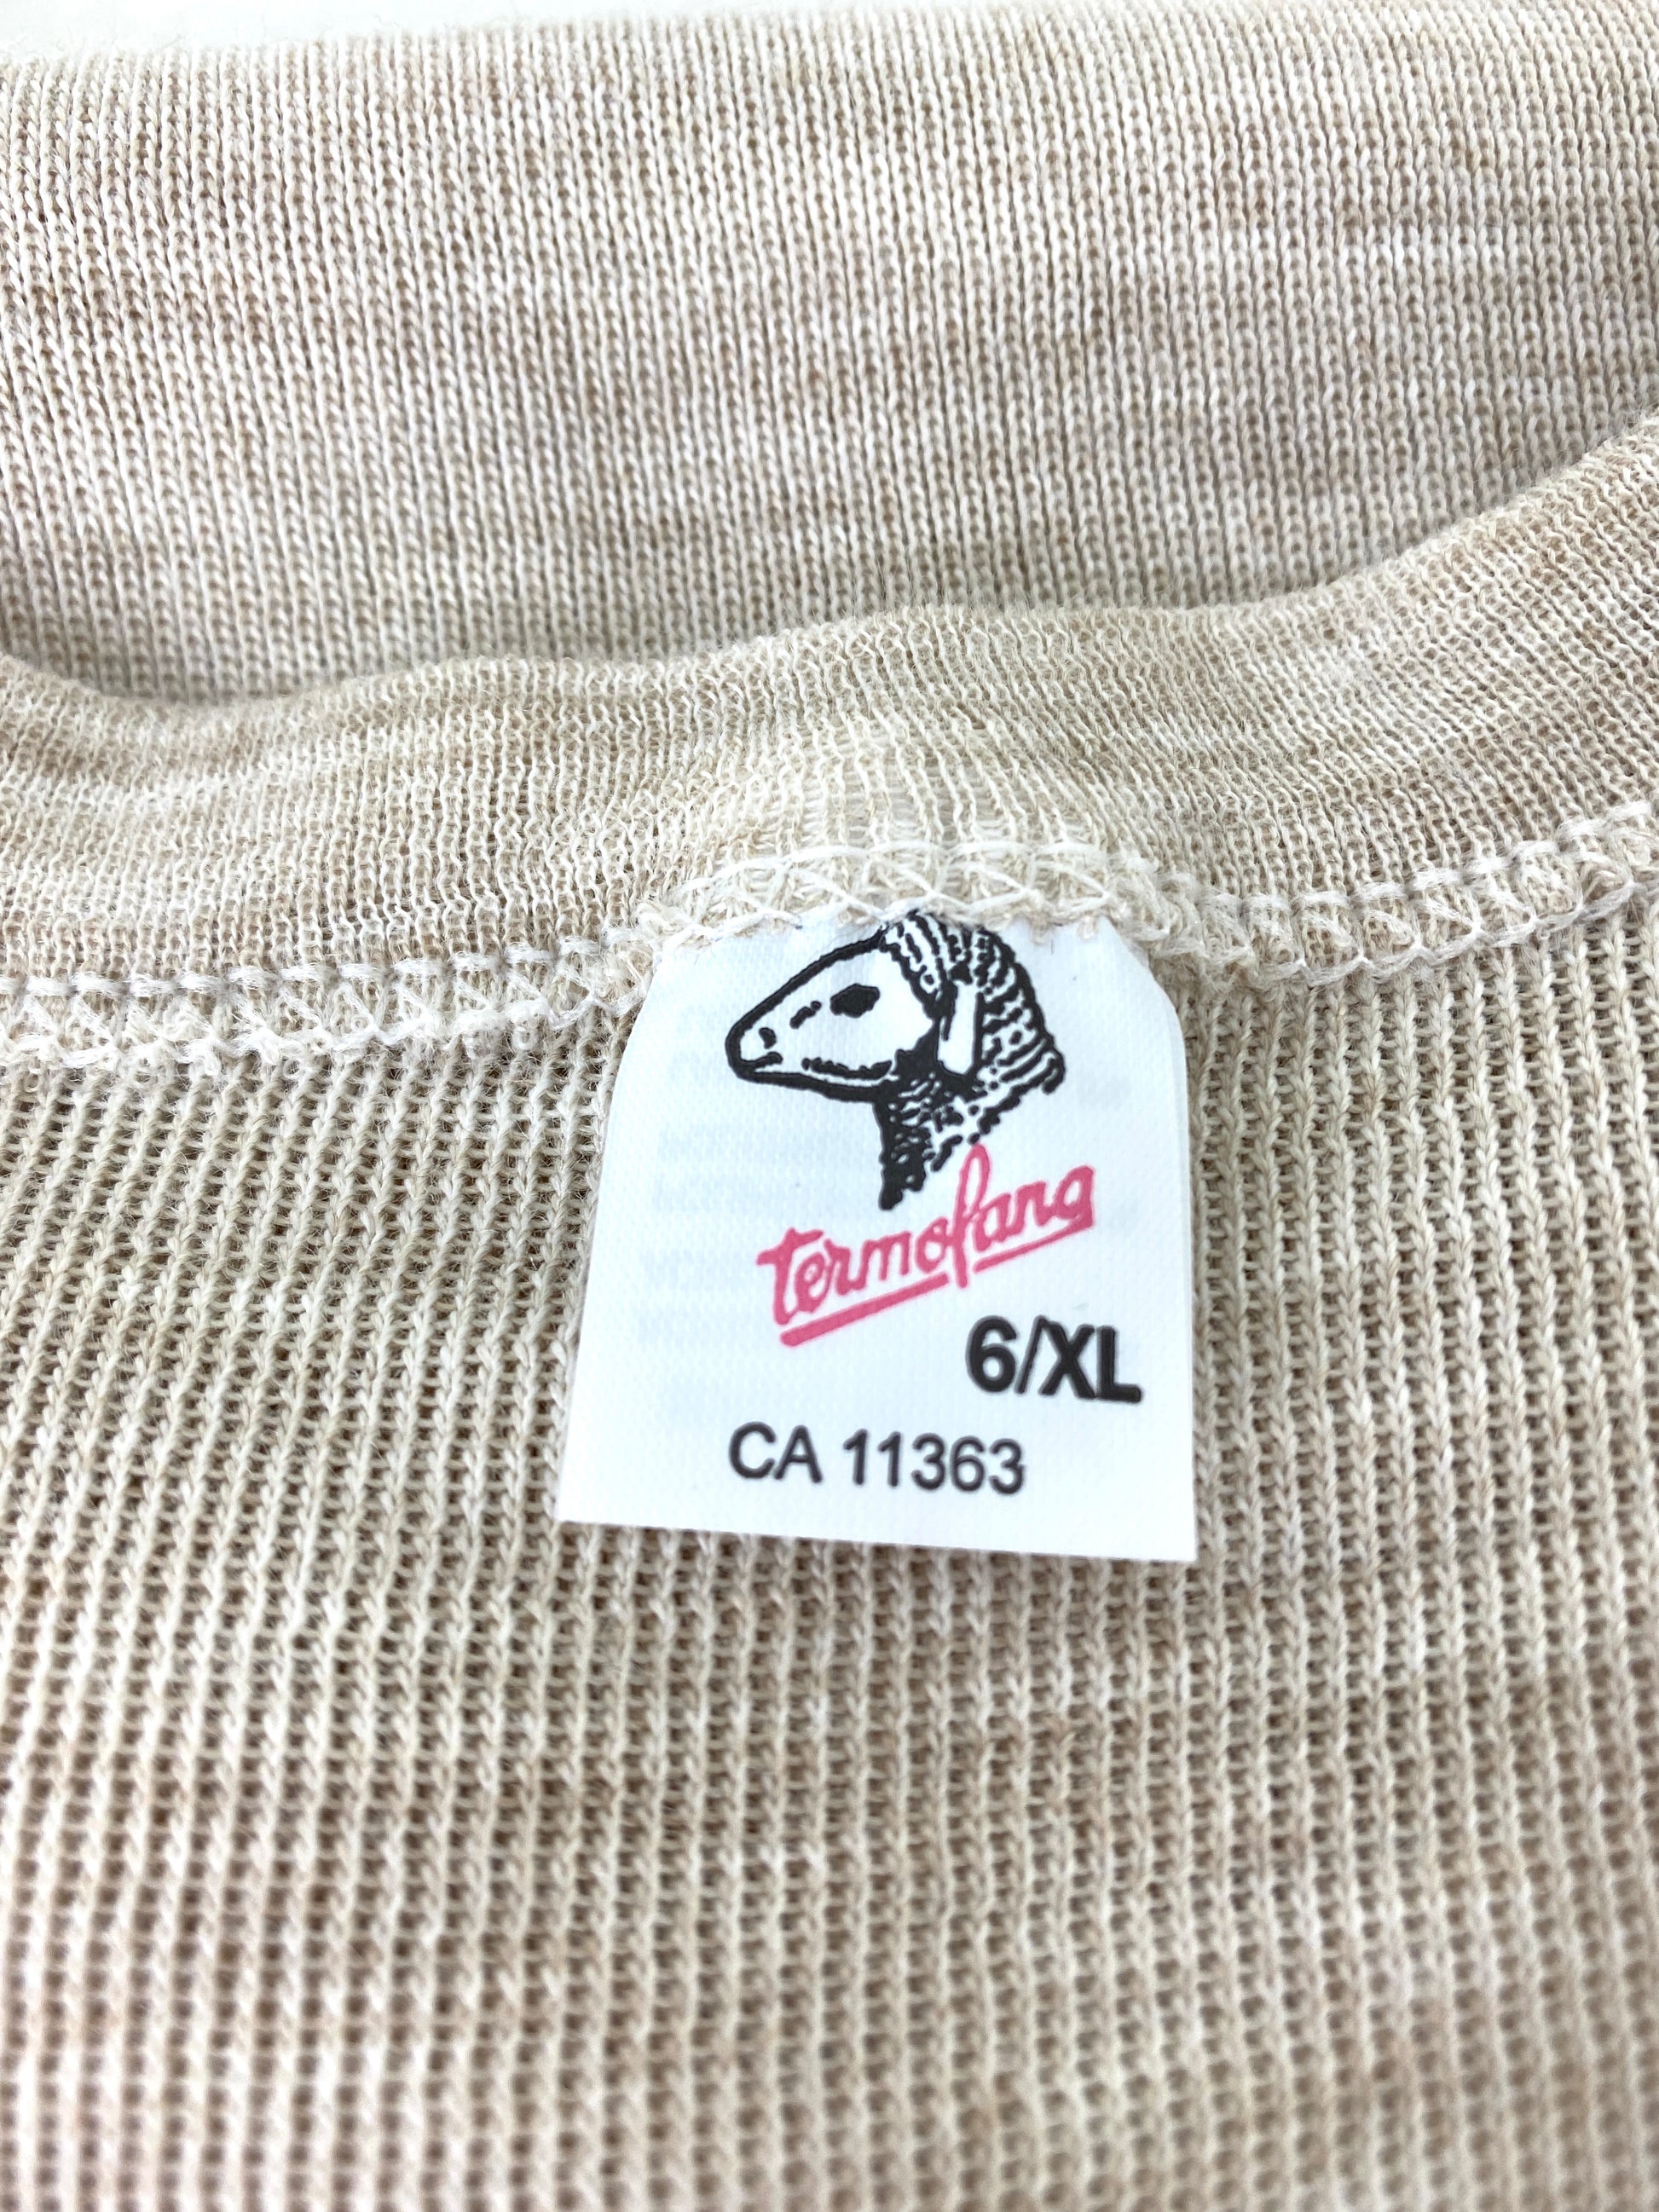 Vintage 1980s Deadstock Heather Long-Sleeve Knit T-Shirt, NOS